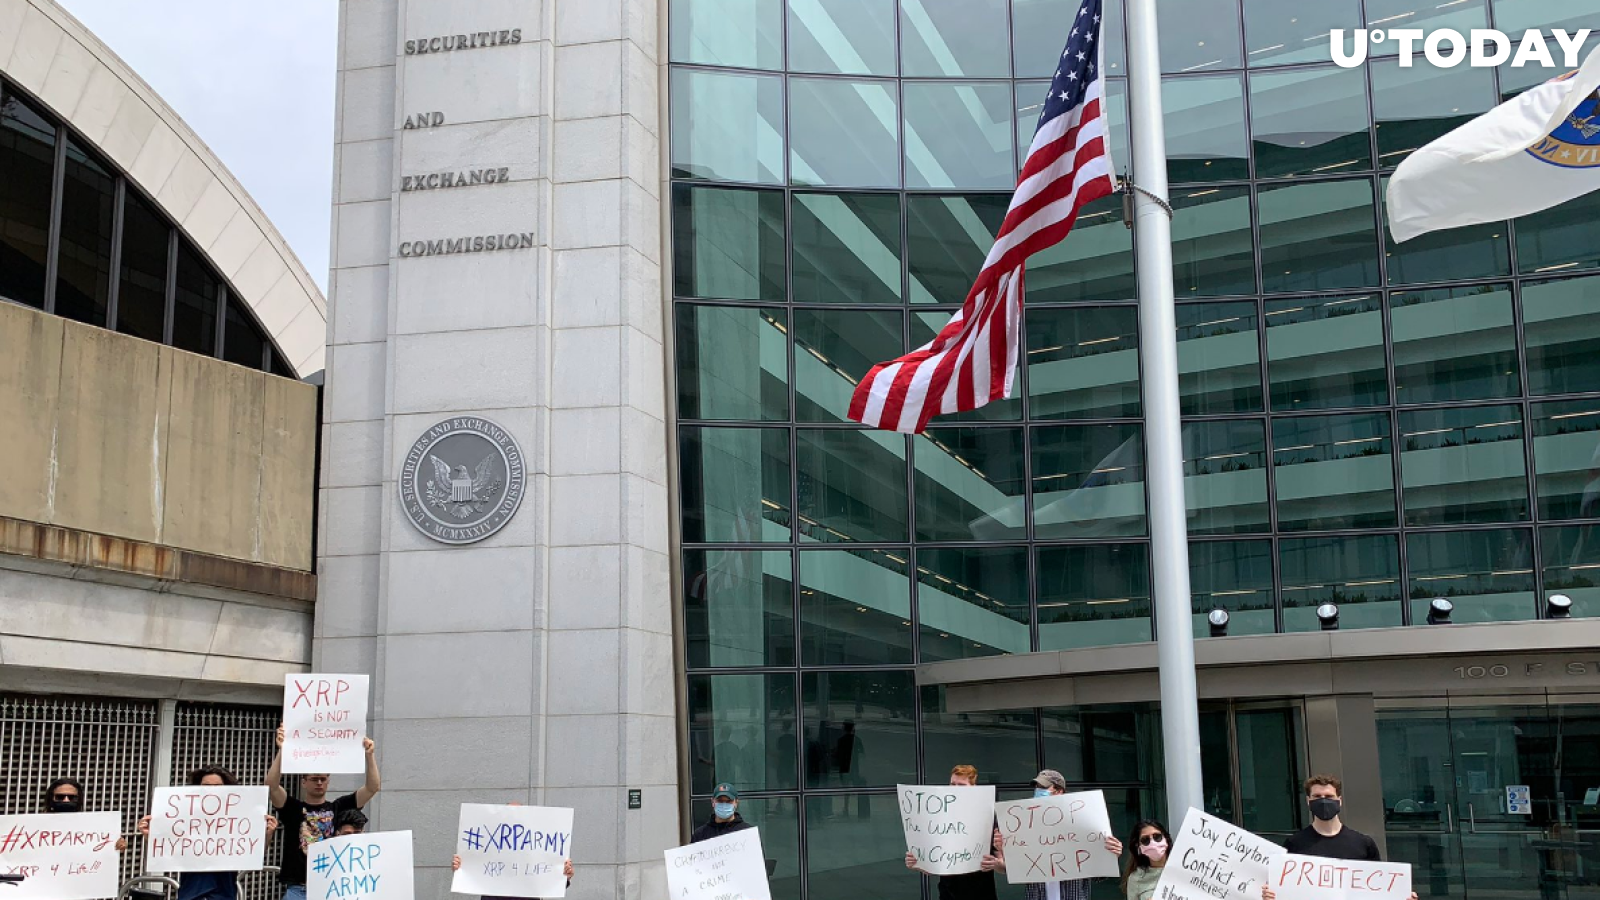 "Stop the War on Crypto": XRP Army Stages Protest Outside SEC Headquarters 